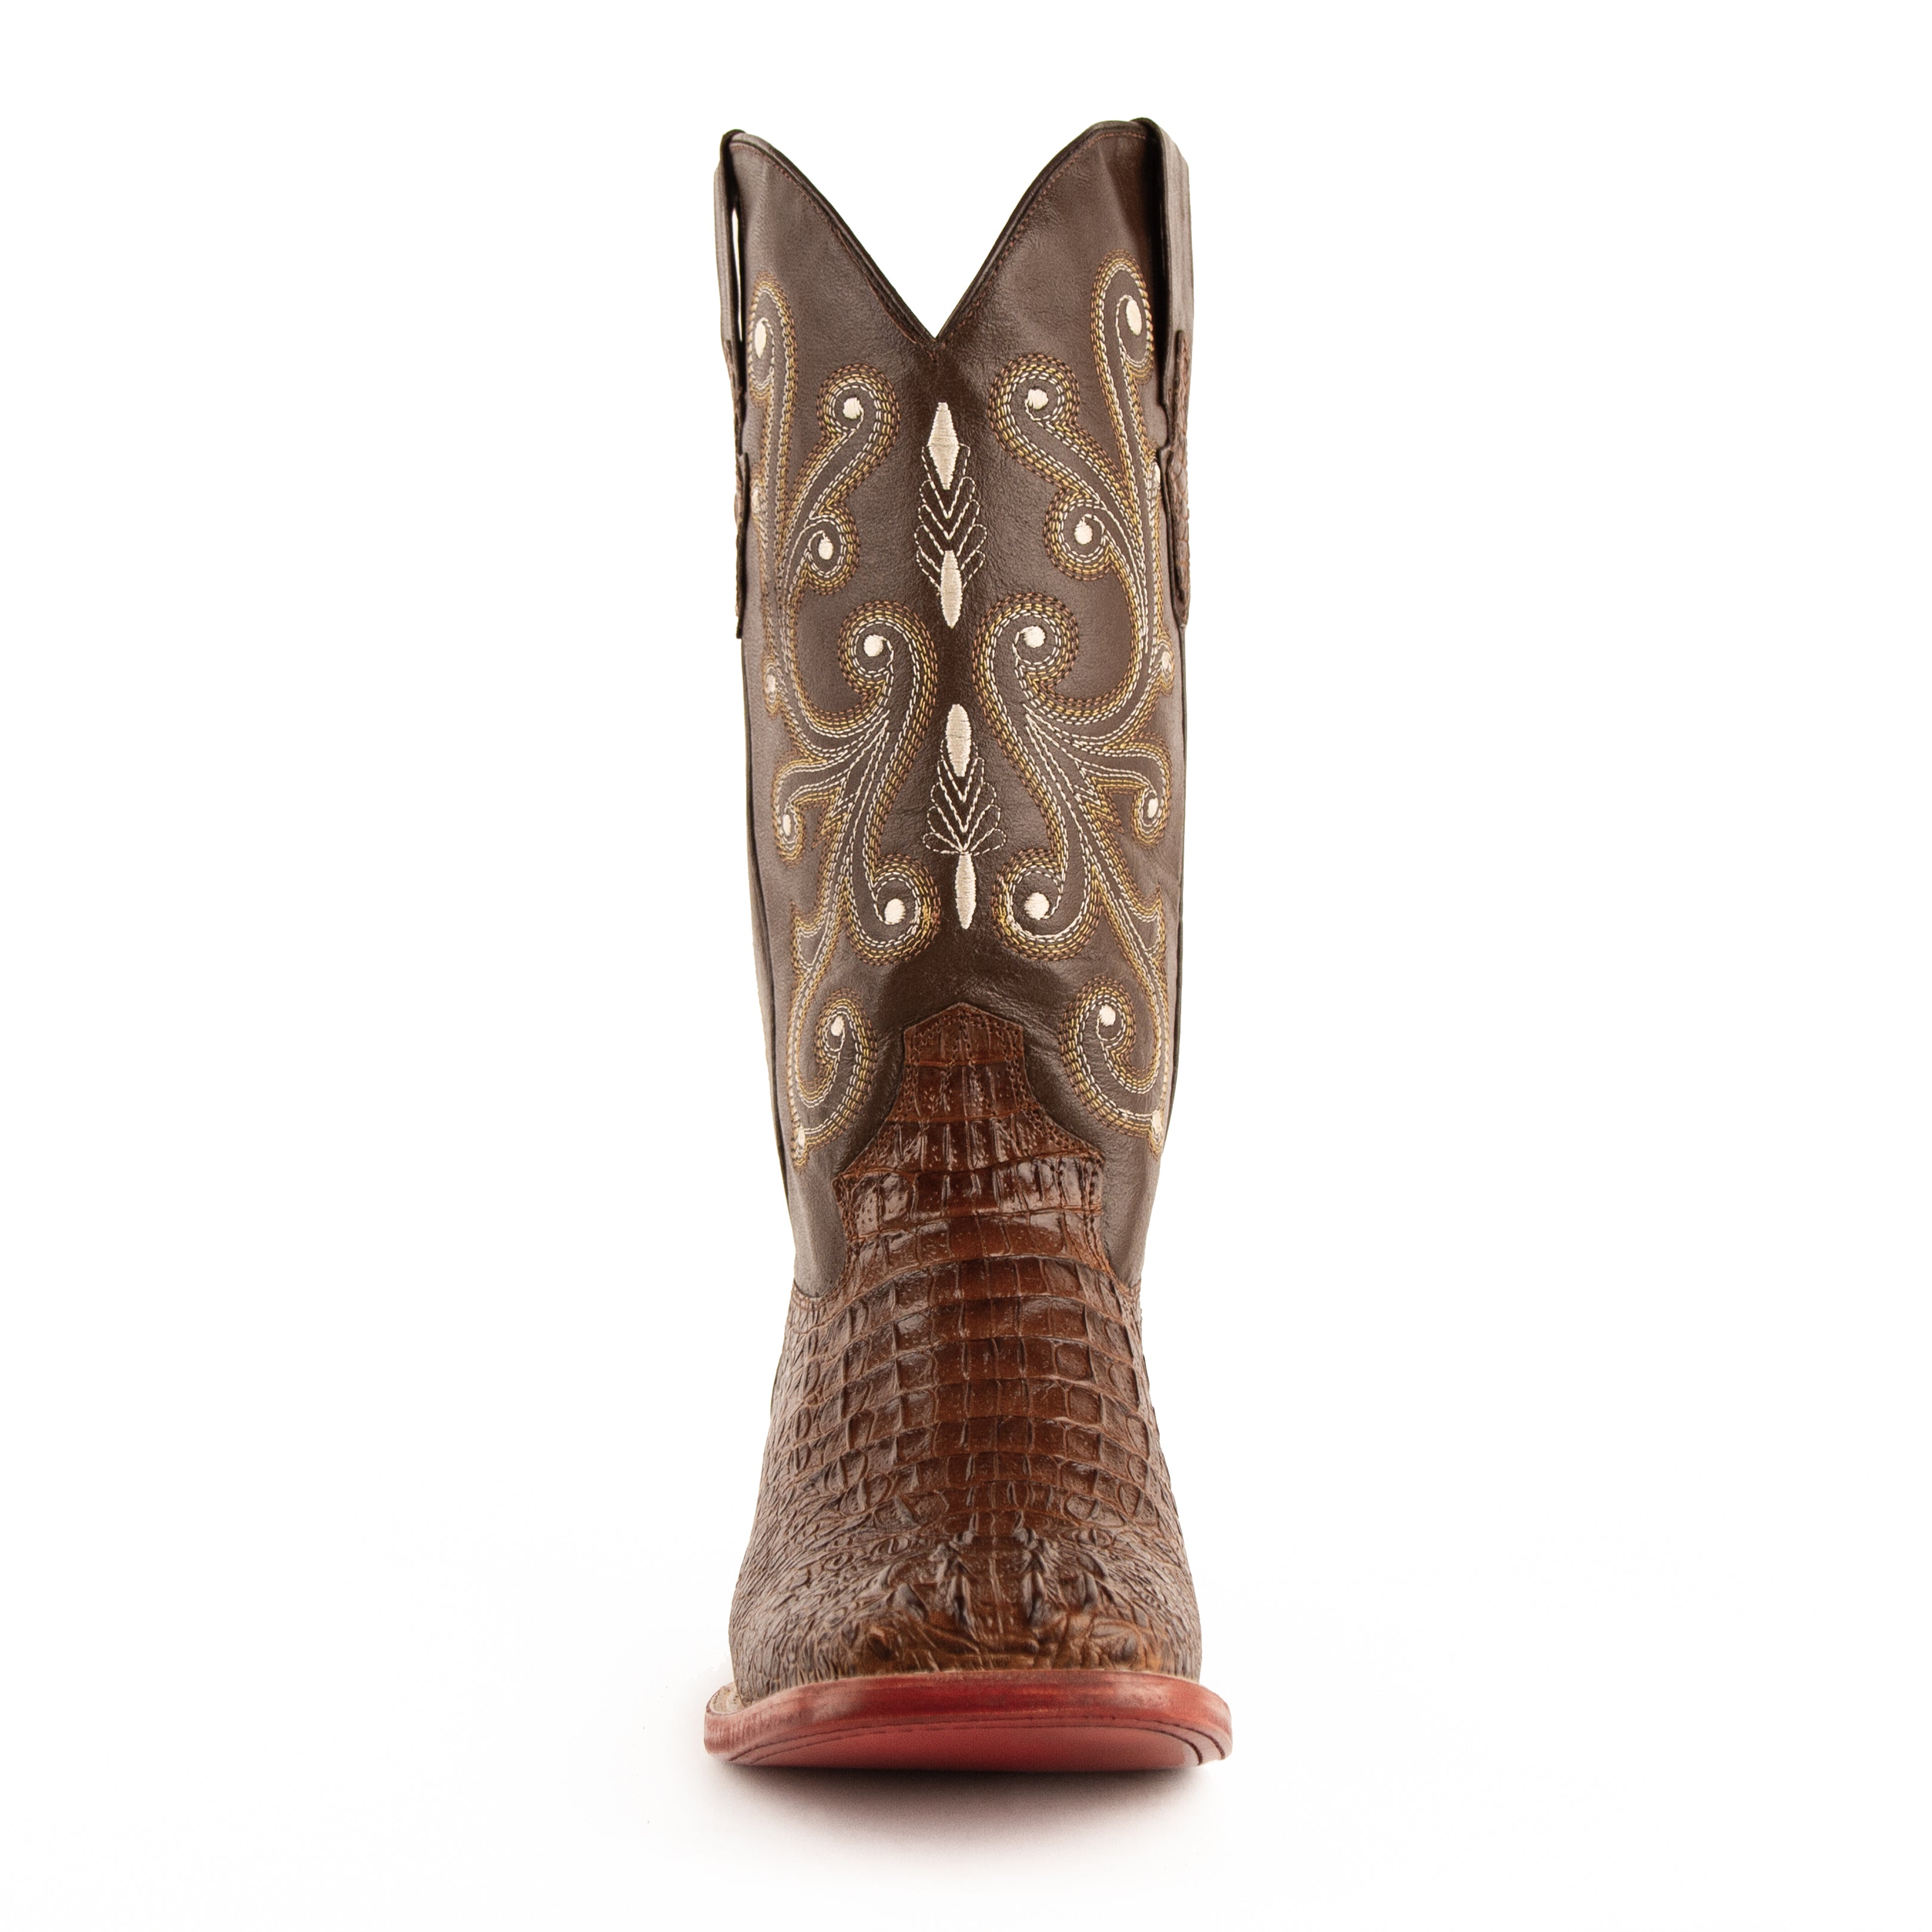 Mens Brown Crocodile Belly Print Exotic Leather Boot. Traditional look perfect in the arena, business meetings or social settings. Truly a boot for any occasion.